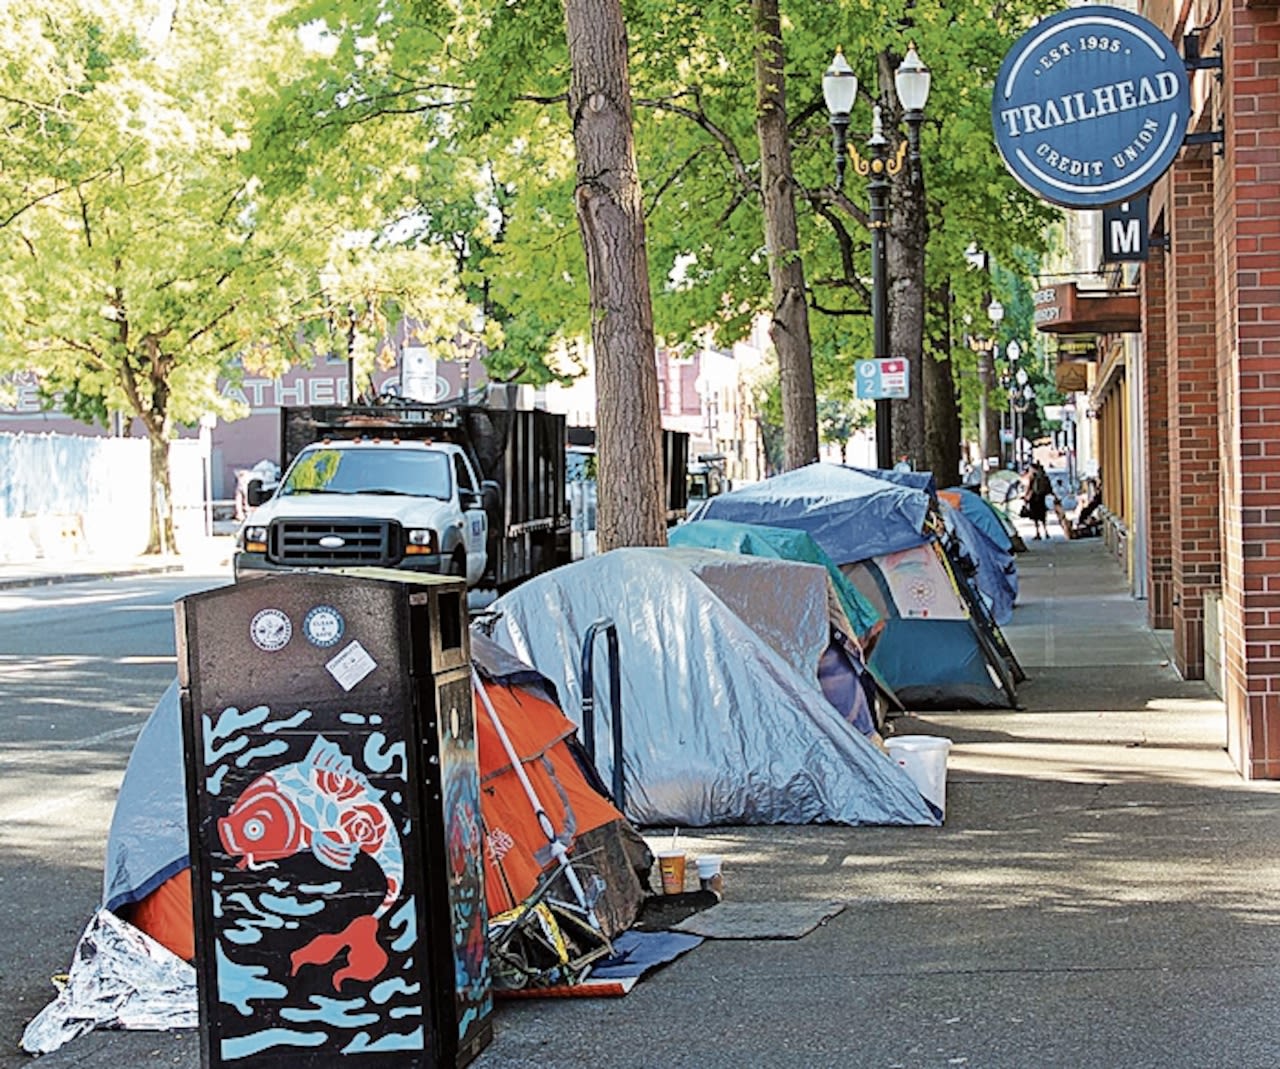 Watch: ‘CBS Sunday Morning’ explores Grants Pass homeless case and upcoming Supreme Court ruling